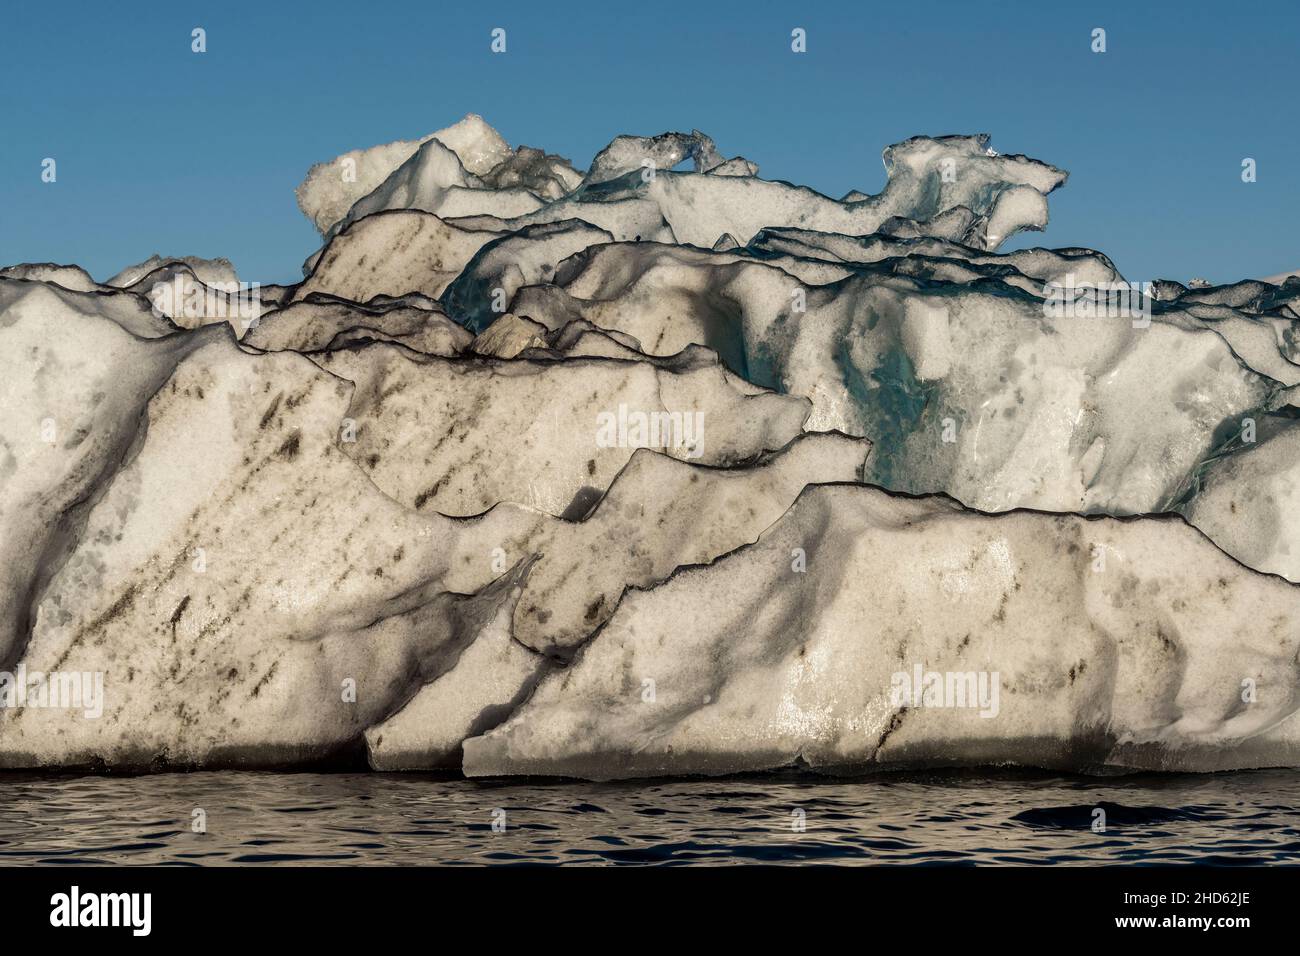 Black-rimmed iceberg close-up, Rodefjord, Scoresby Sund, East Greenland Stock Photo